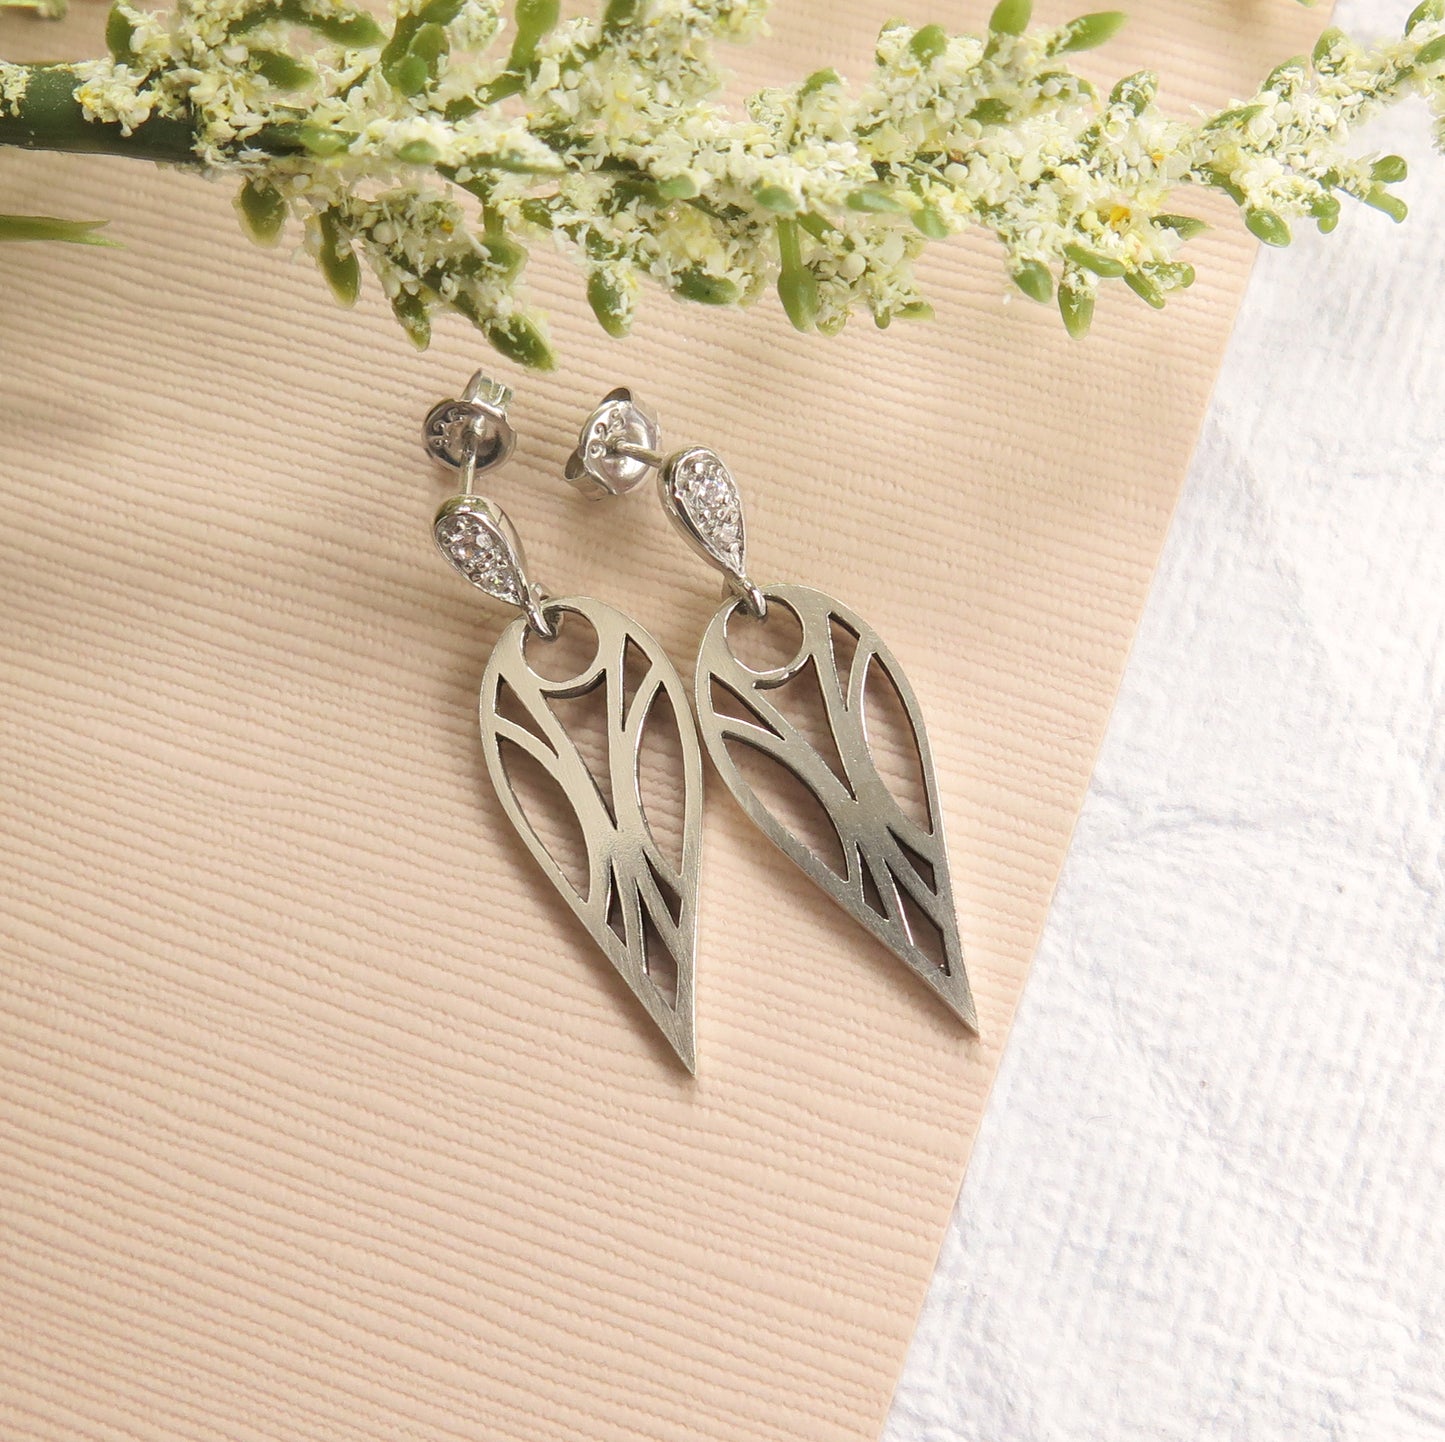 Geometric art deco teardrop stud earrings in sterling silver with cubic zirconia gemstones on a beige and white textured paper with a sprig of flowers.